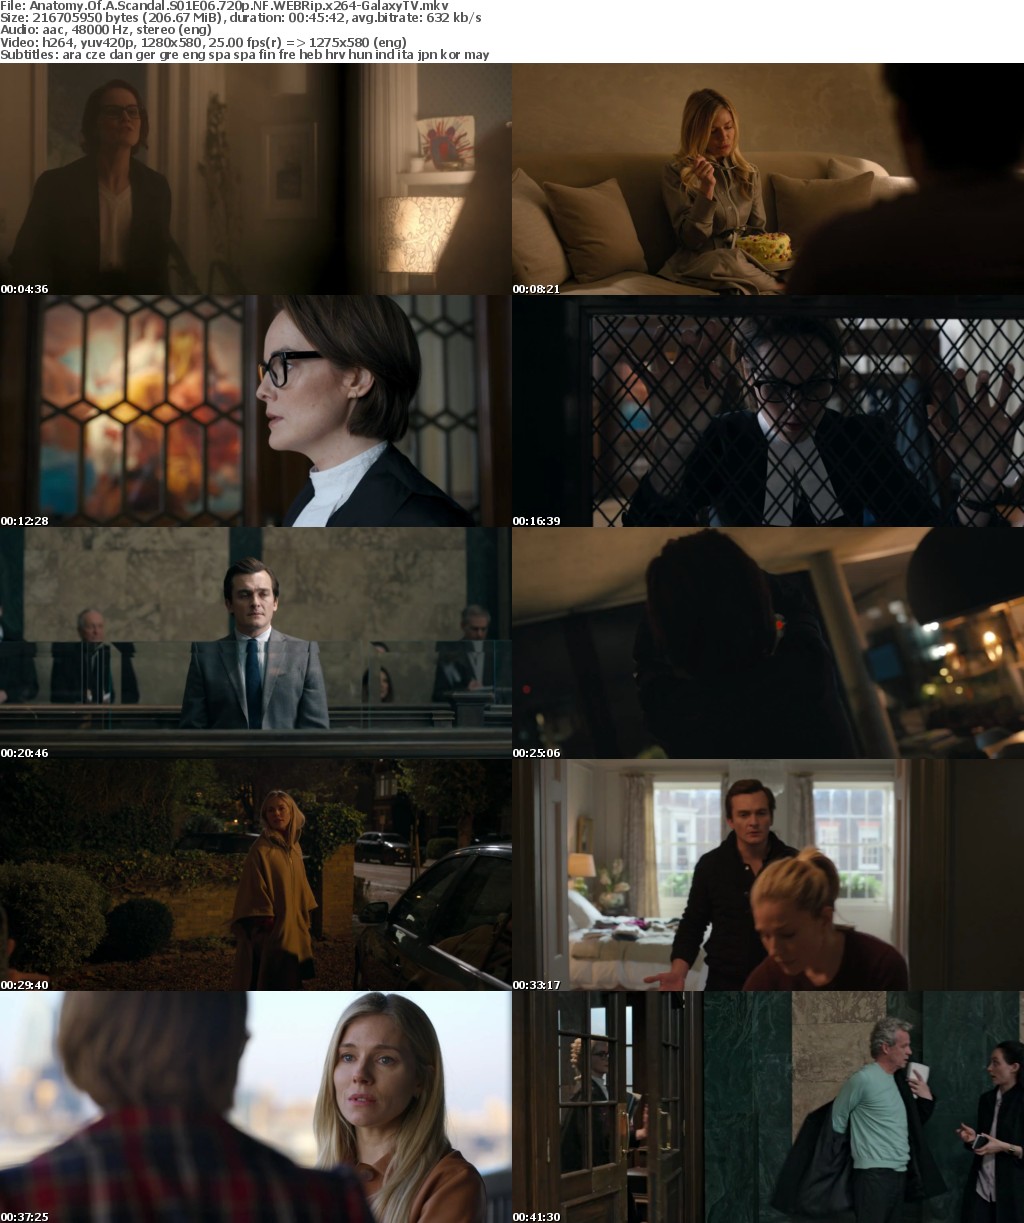 Anatomy Of A Scandal S01 COMPLETE 720p NF WEBRip x264-GalaxyTV